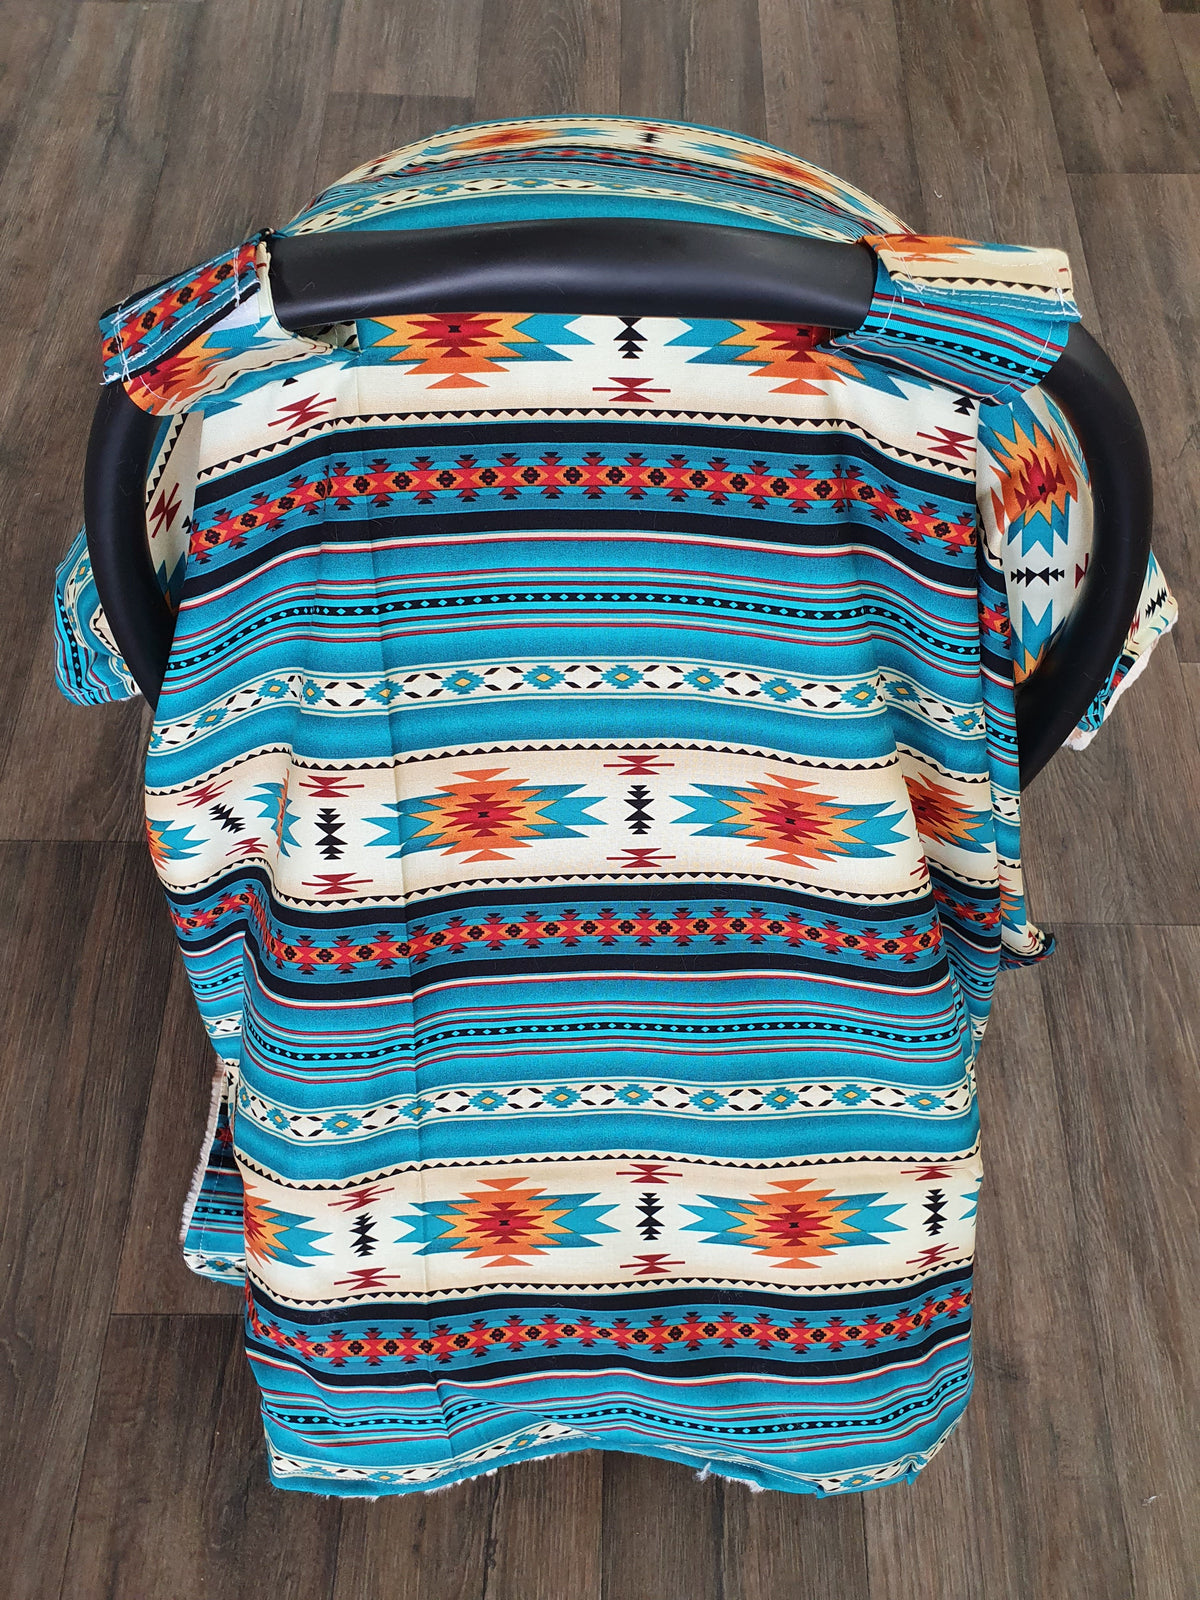 Carseat Tent - Aztec in Teal - DBC Baby Bedding Co 